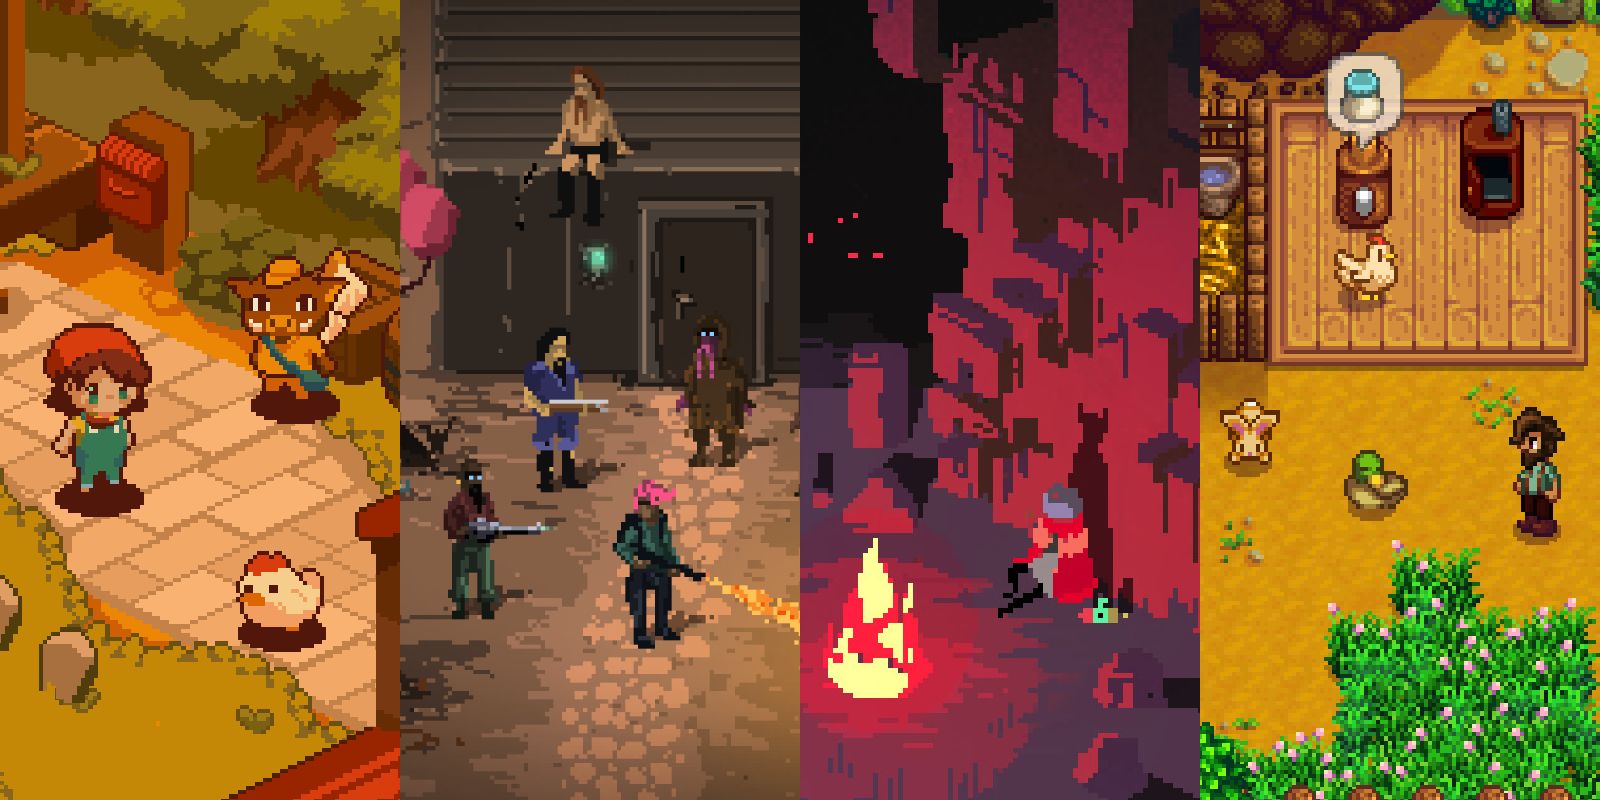 How Games Like Stardew Valley & Undertale Use Pixel Art (& Why)